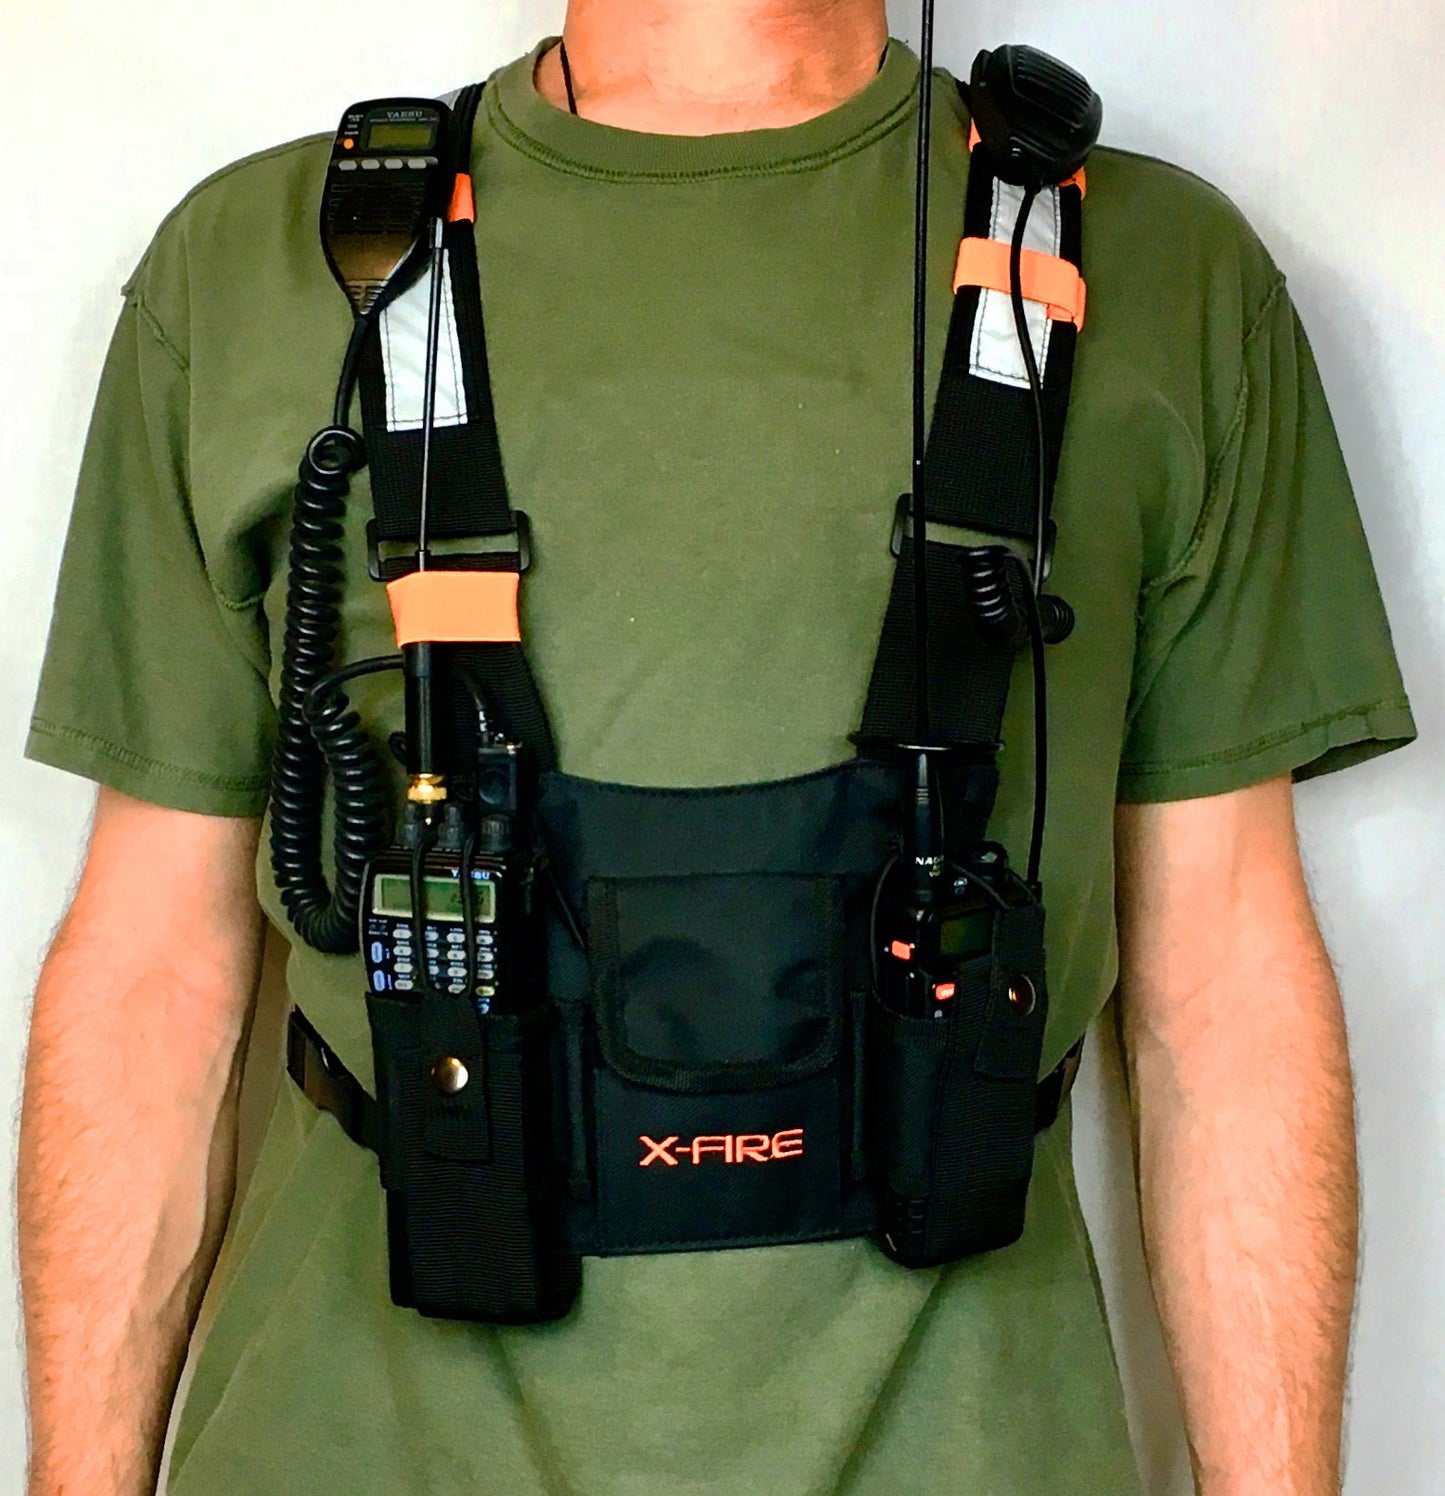 X-FIRE® Dual Portable Radio Chest Rig Harness for Two-Way Radios w/ 3m Reflective